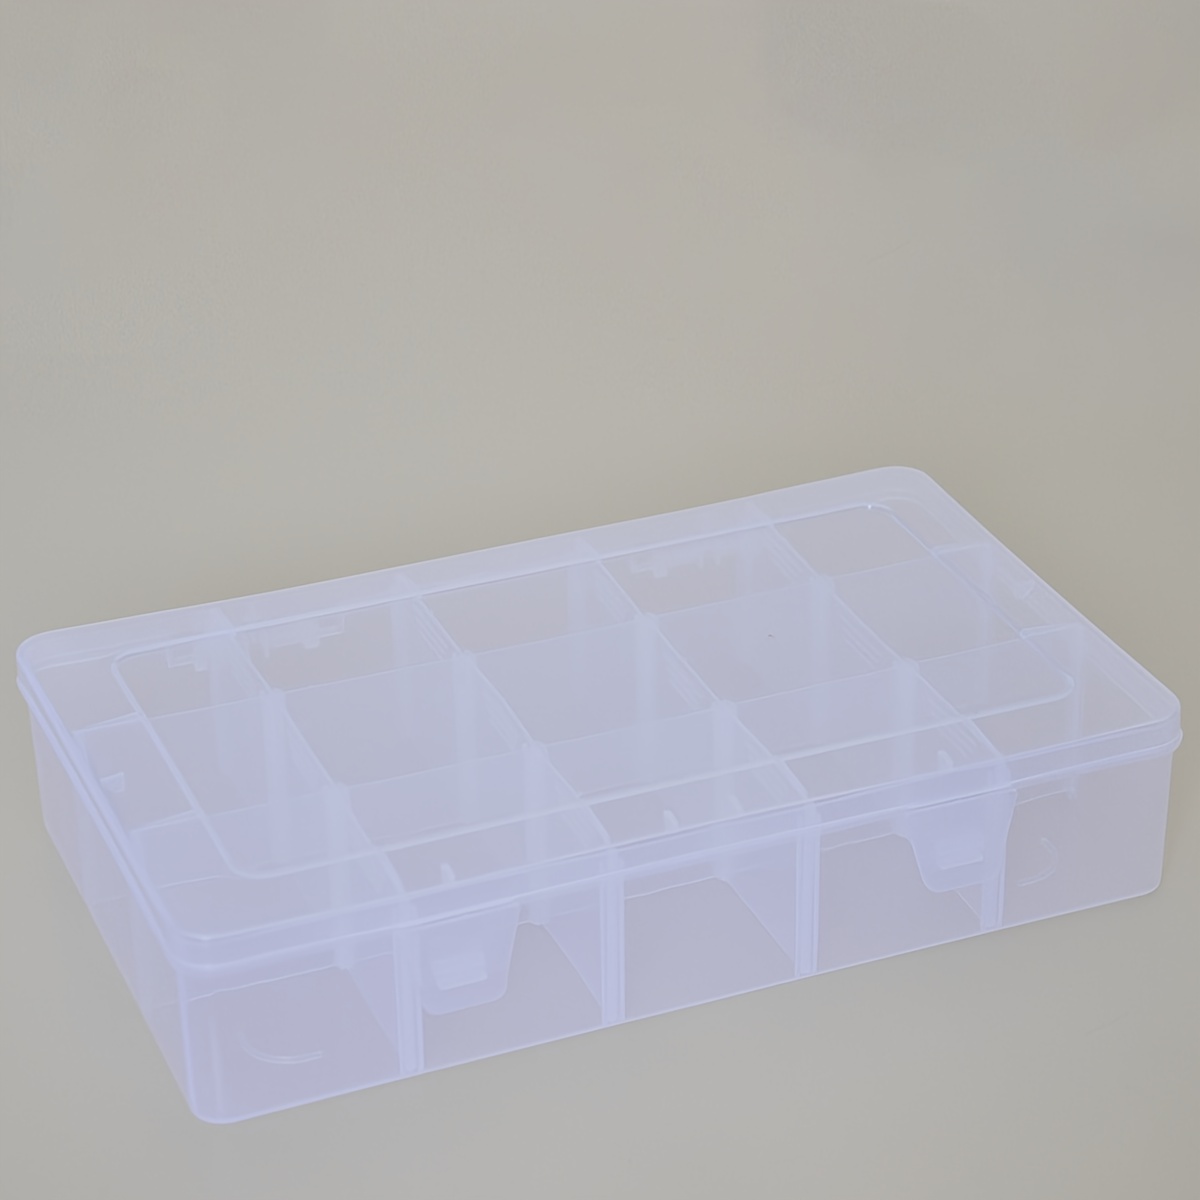 1pc 15-grid Large Plastic Storage Box, With Adjustable Dividers,  Transparent Organizer Case, Jewelry Craft Container, Tape Beads Stickers  Storage Case